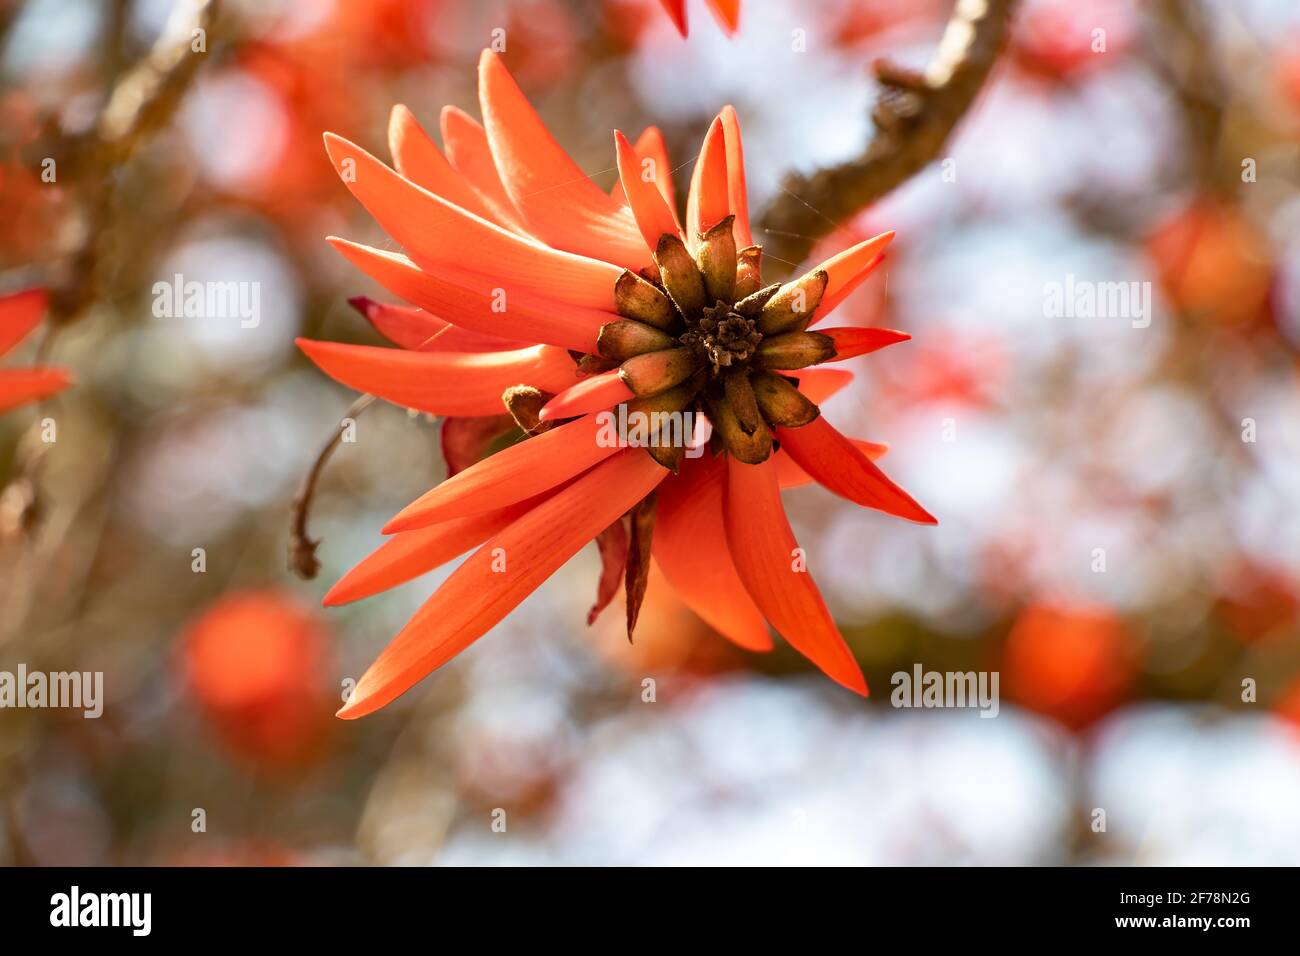 Erythrina caffra, the coast coral tree or African coral tree, is native to southeastern Africa, often cultivated and introduced in California. Conside Stock Photo